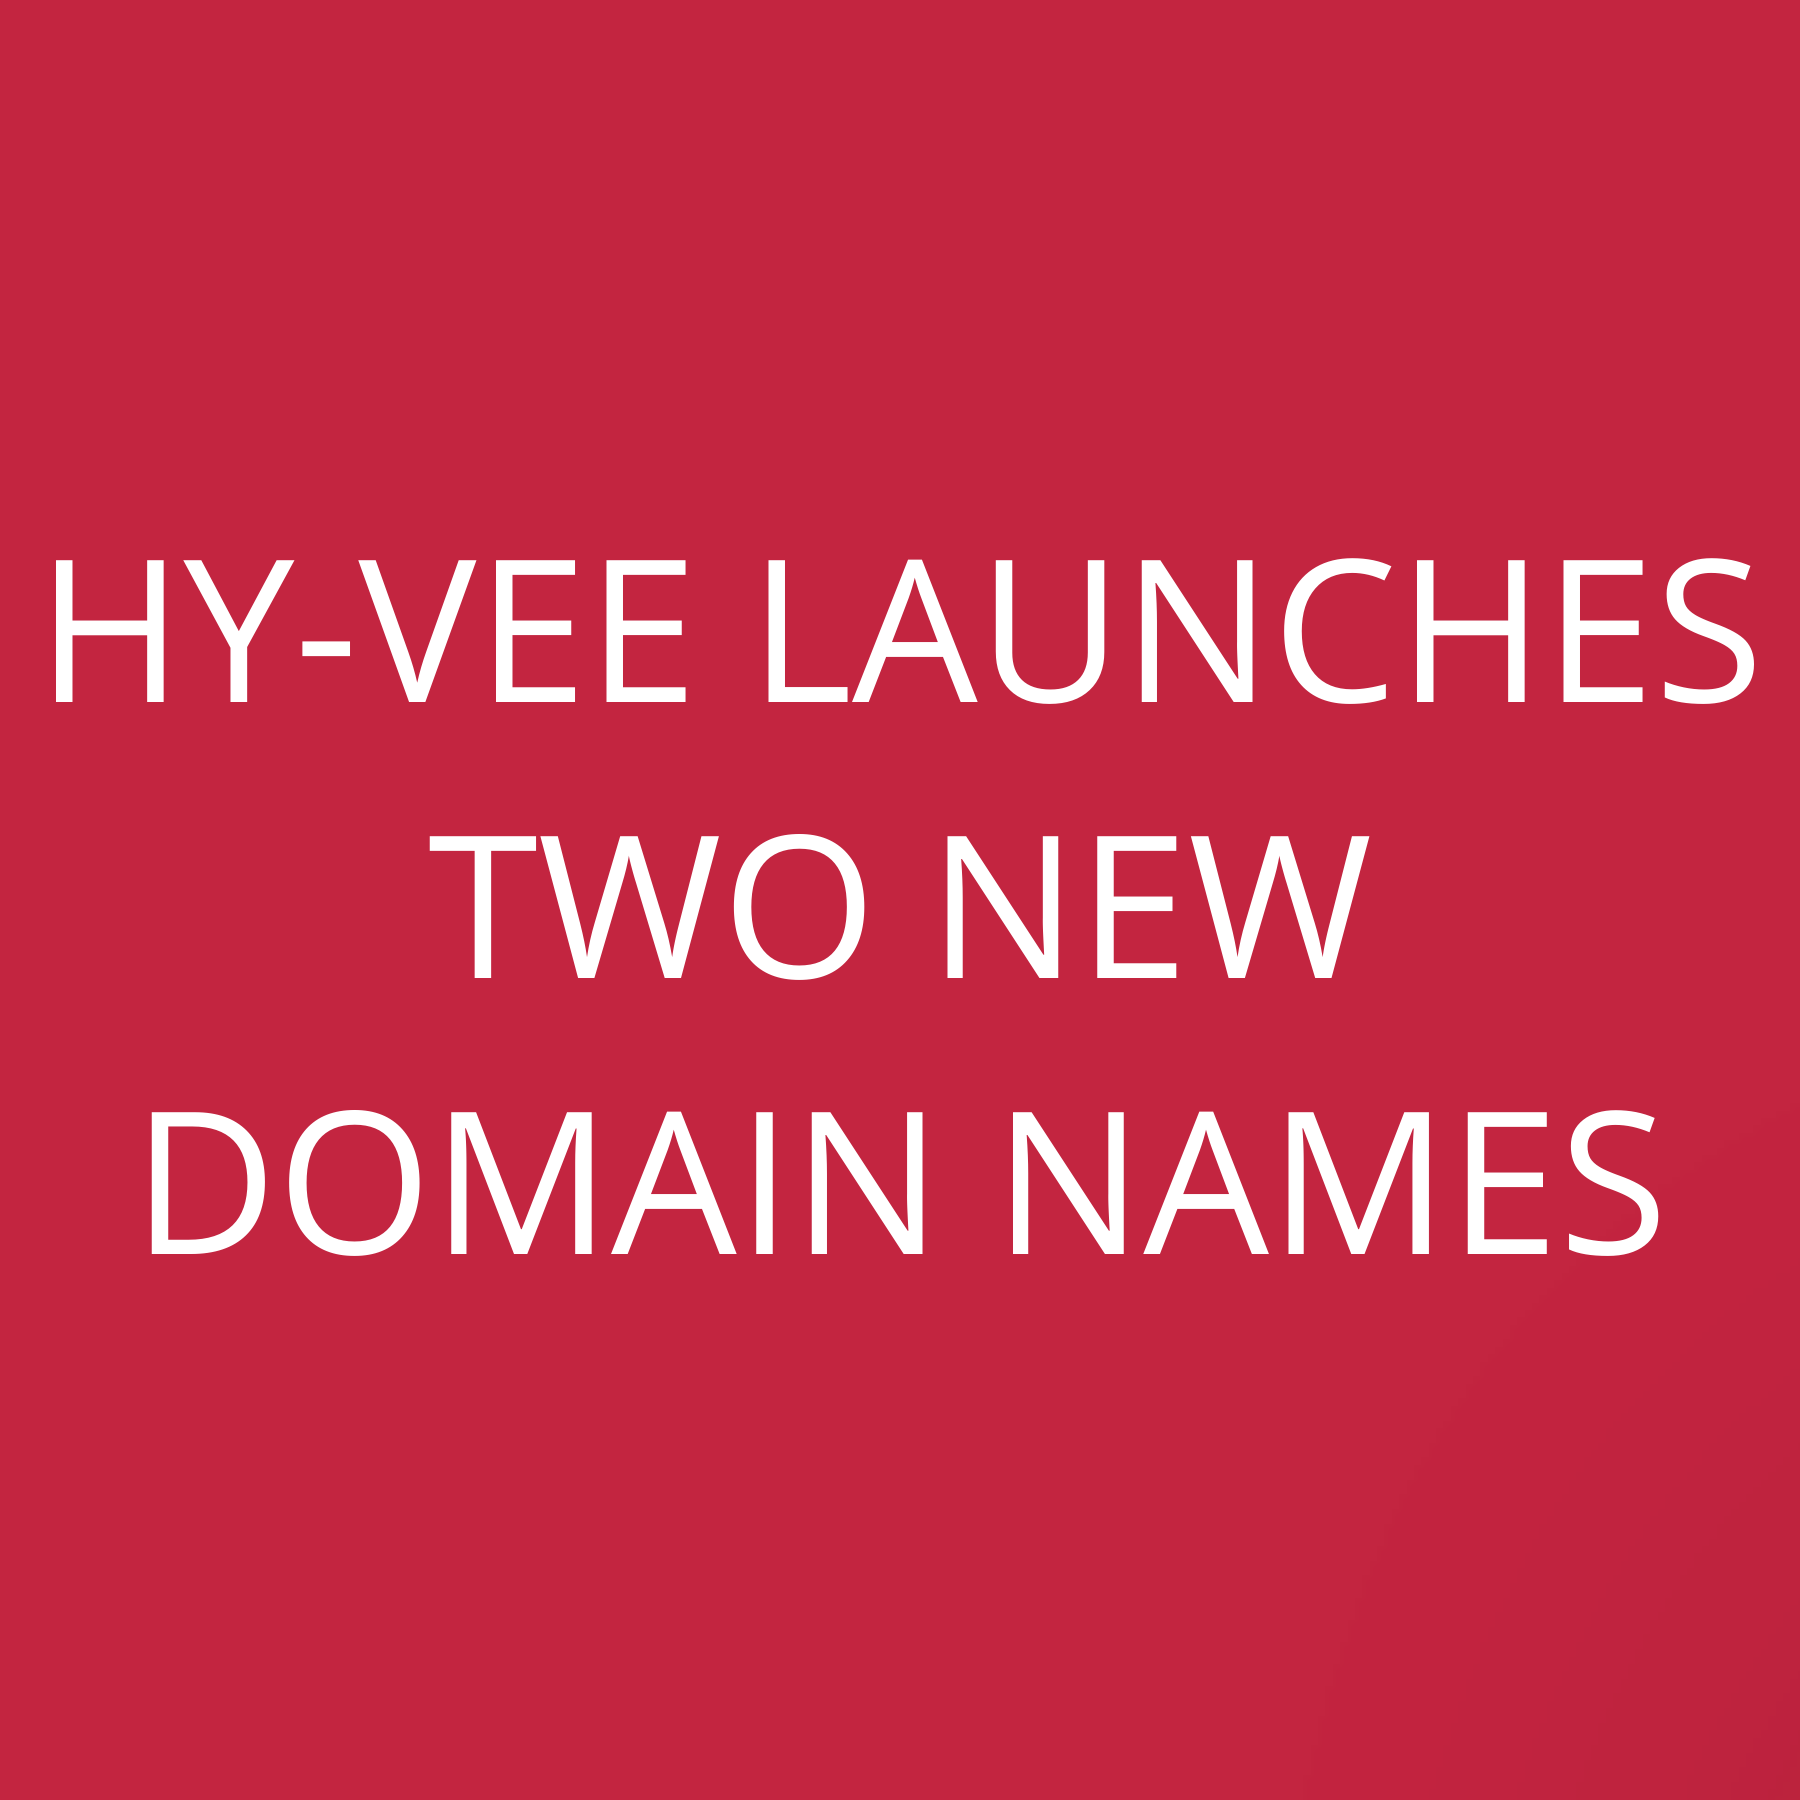 Hy-vee launches two new domain names